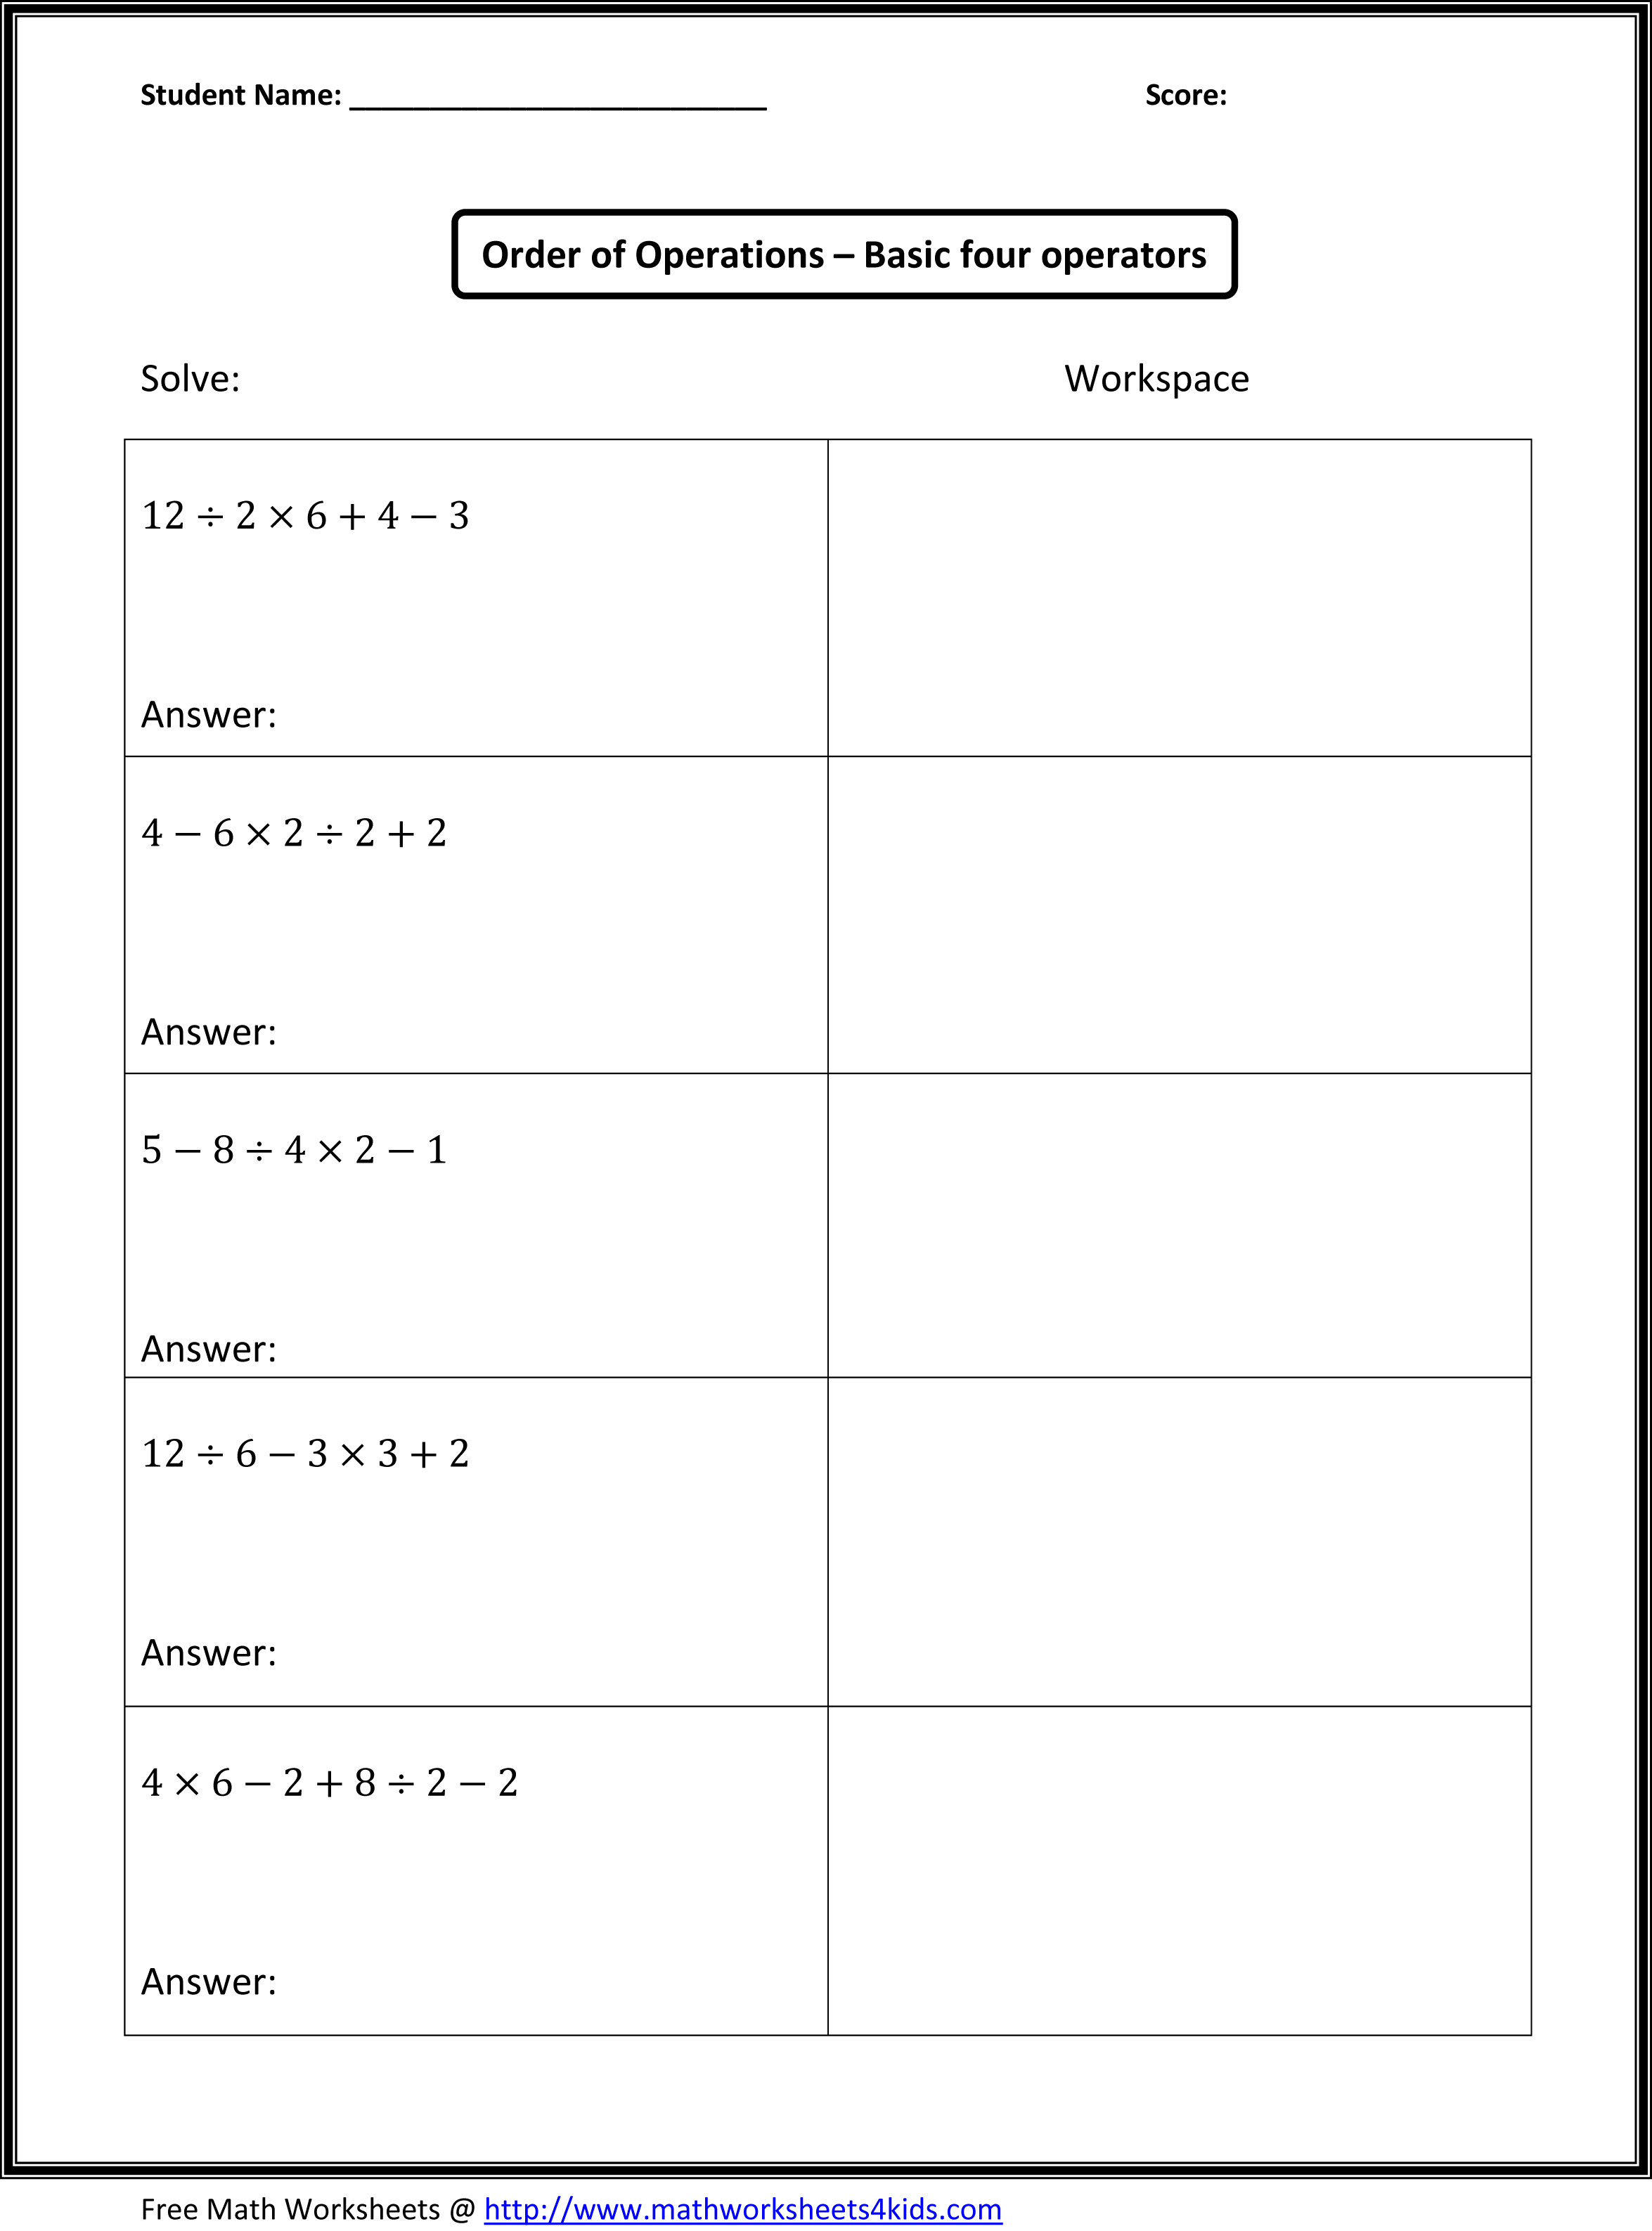 12 Best Images of Order Of Operations Worksheets With Answers - Order